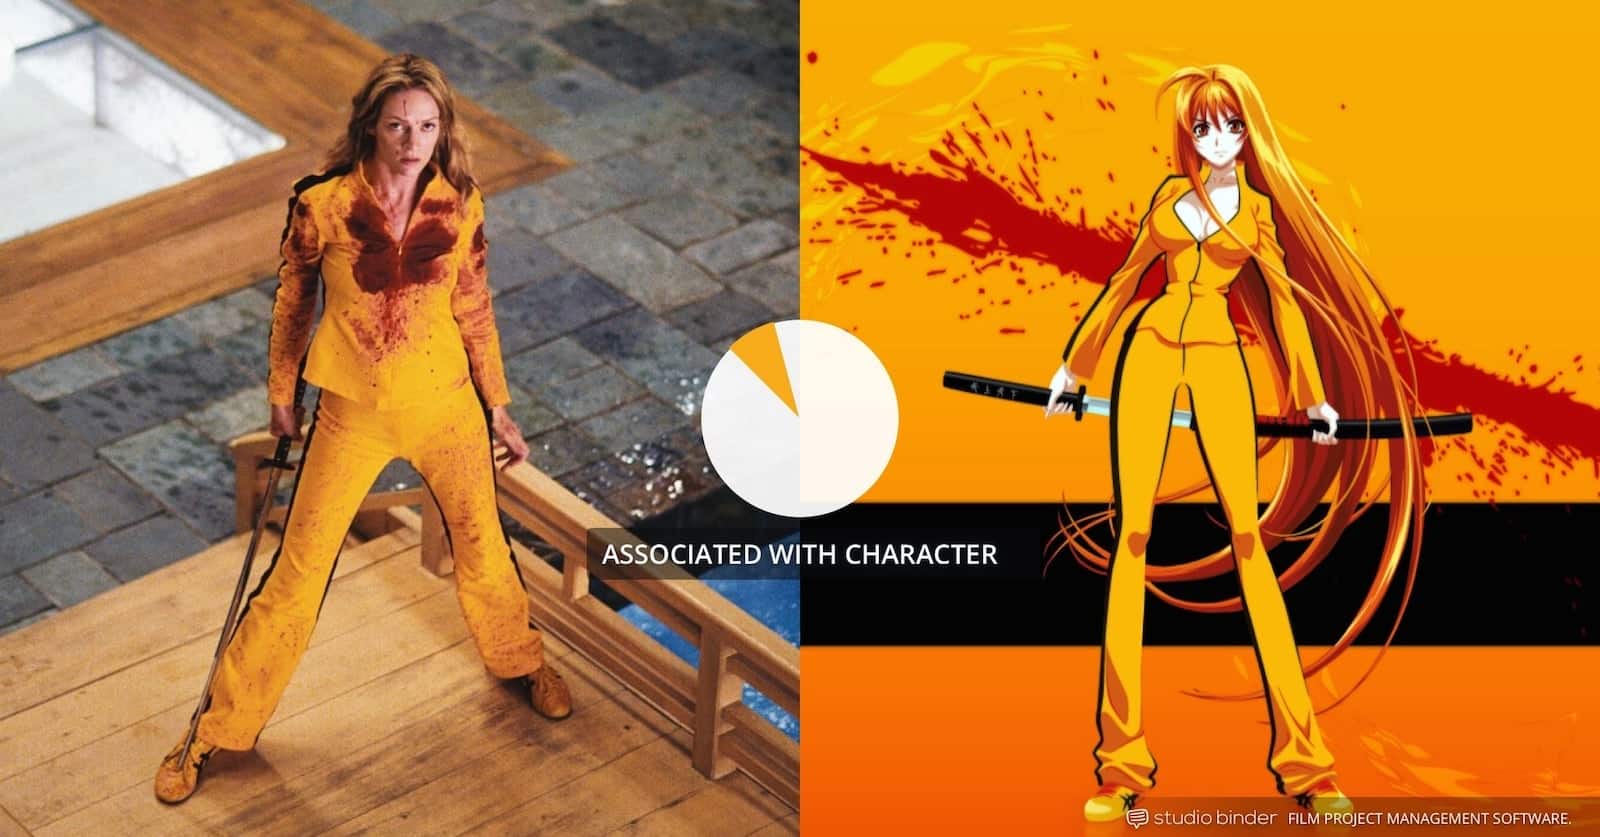 How to Use Color in Film - Movie Color Palette - Associated Colors - Kill Bill